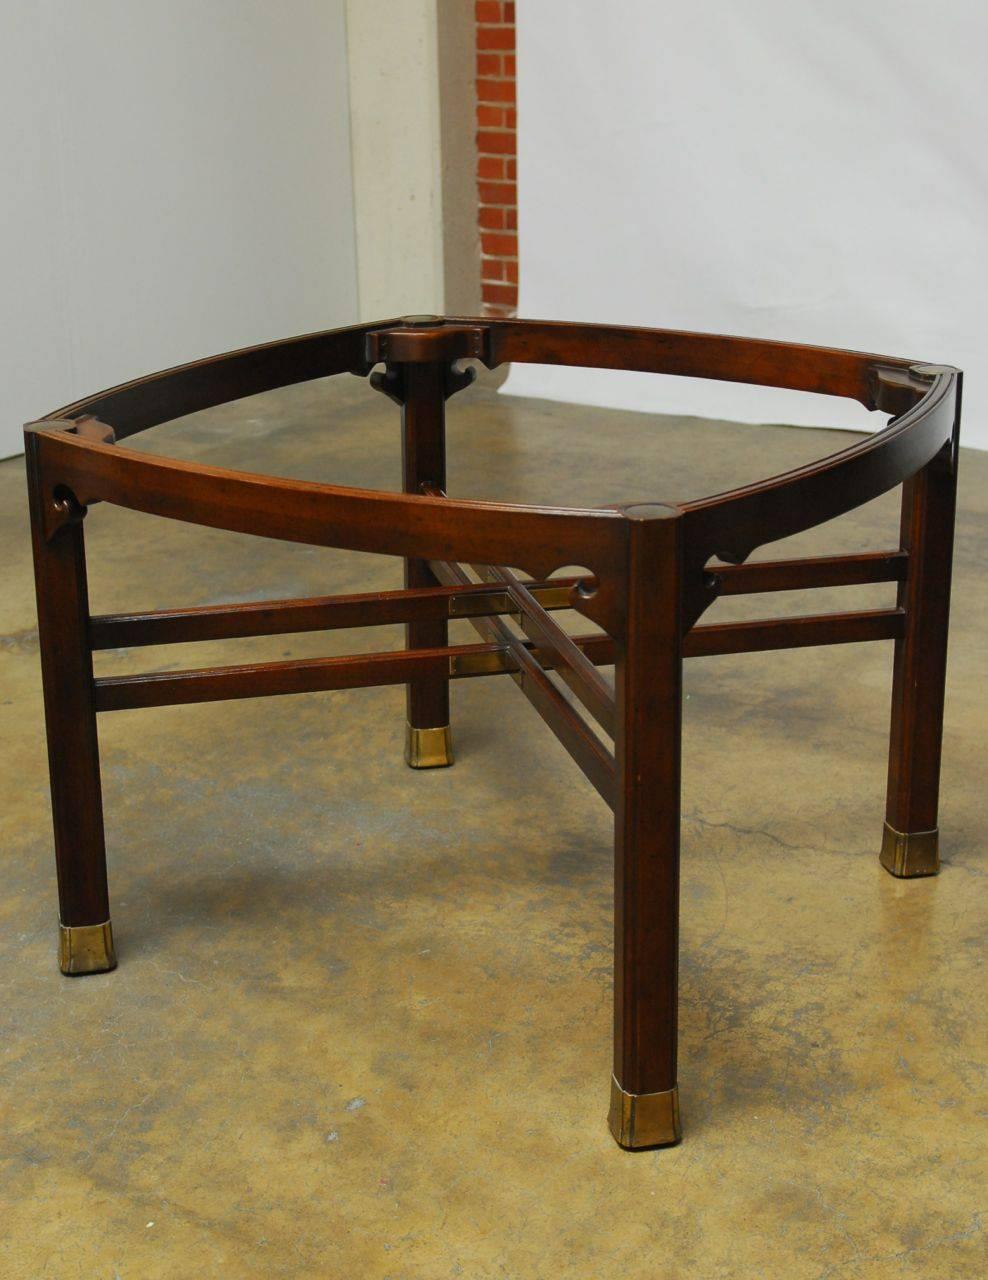 Exquisite Chinese ming style dining table by Henredon. Constructed from mahogany featuring cross stretcher supports with brass plates and cloud motif spandrels. Supported by thick reeded legs with brass foot protectors. This unique table has a